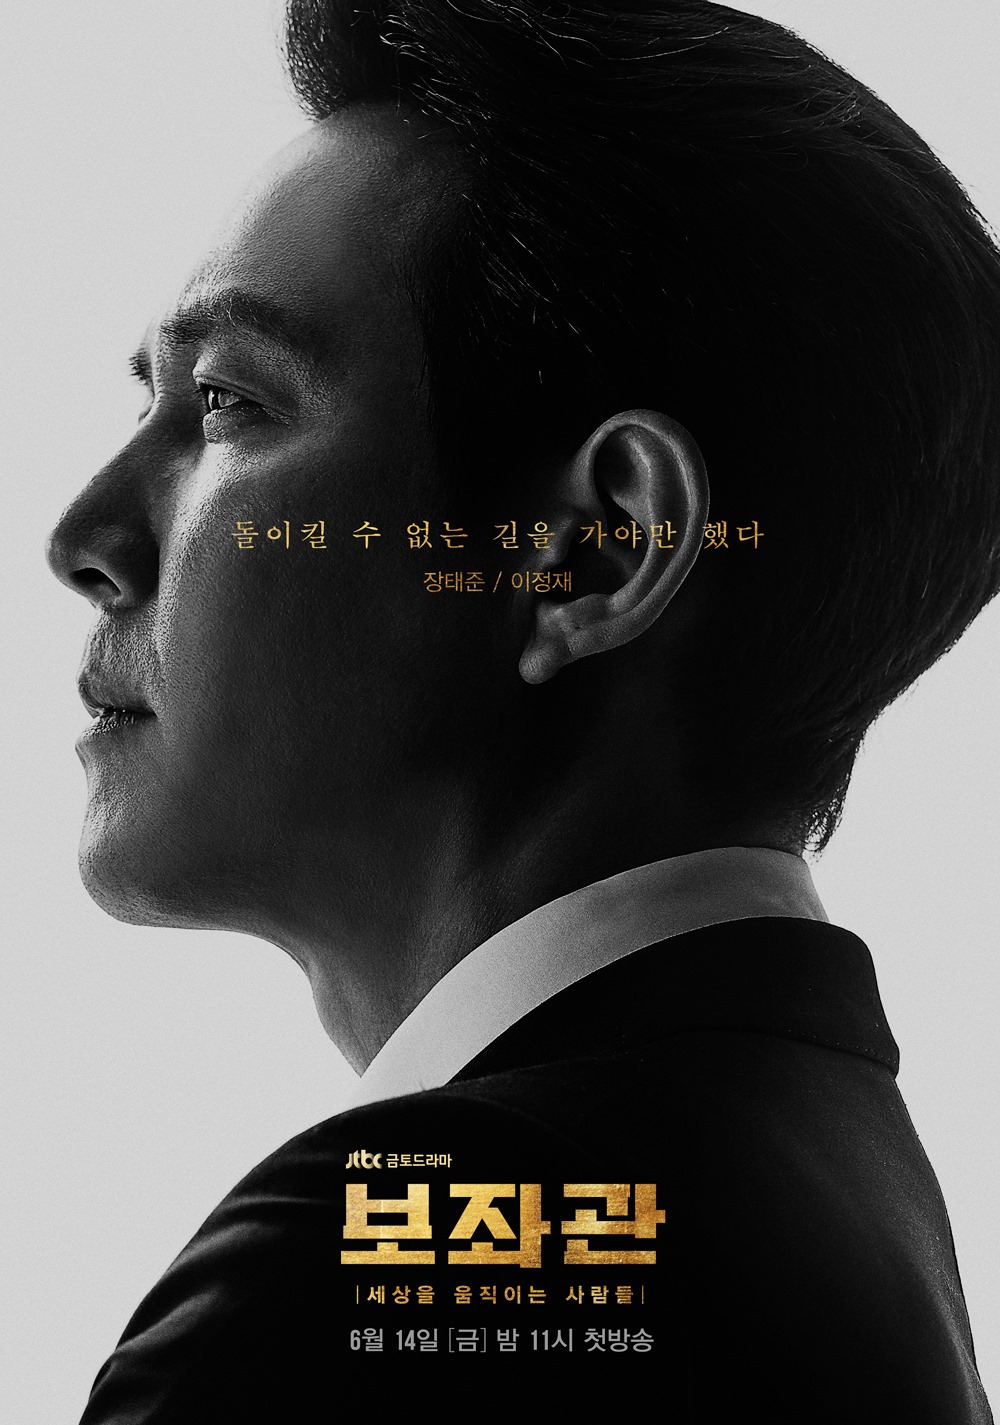 Teaser trailer #2 & character posters for JTBC drama series “Aide ...